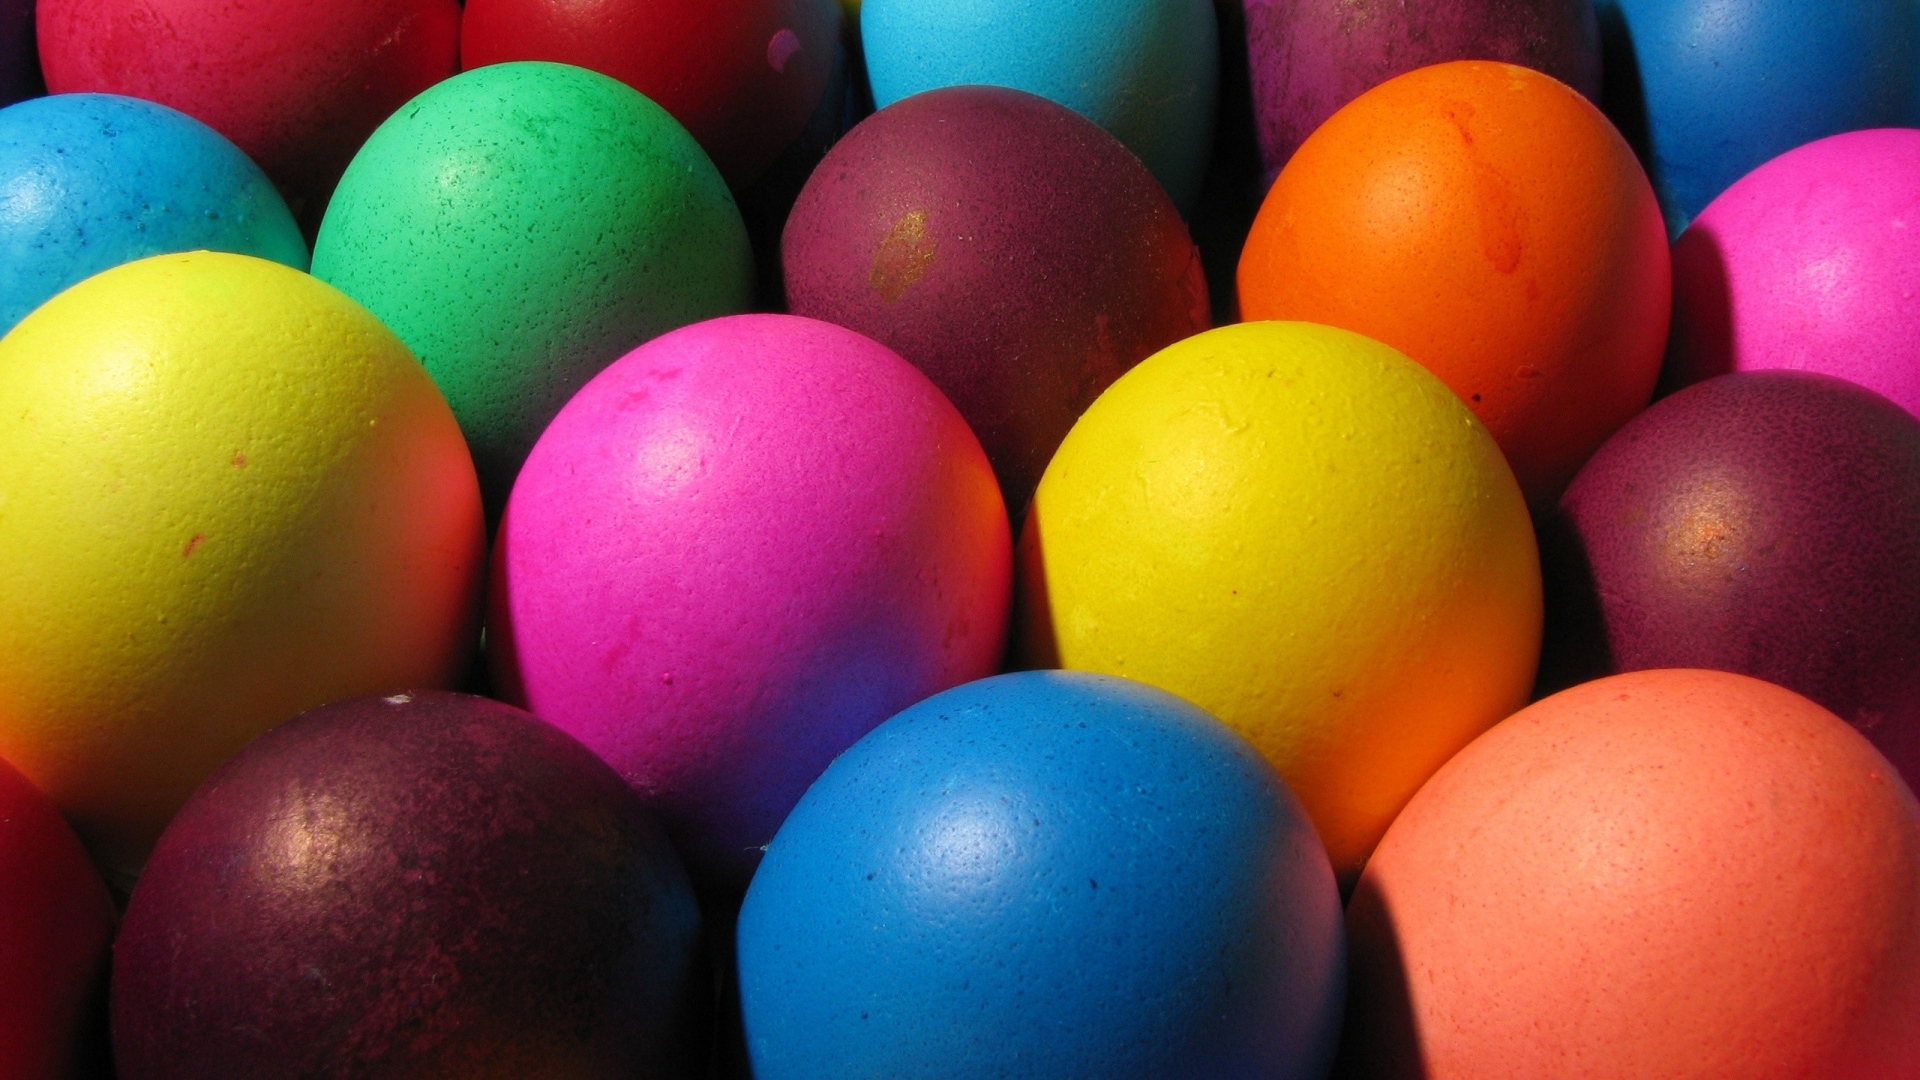 Wallpaper Bright Colorful Eggs Easter Full HD